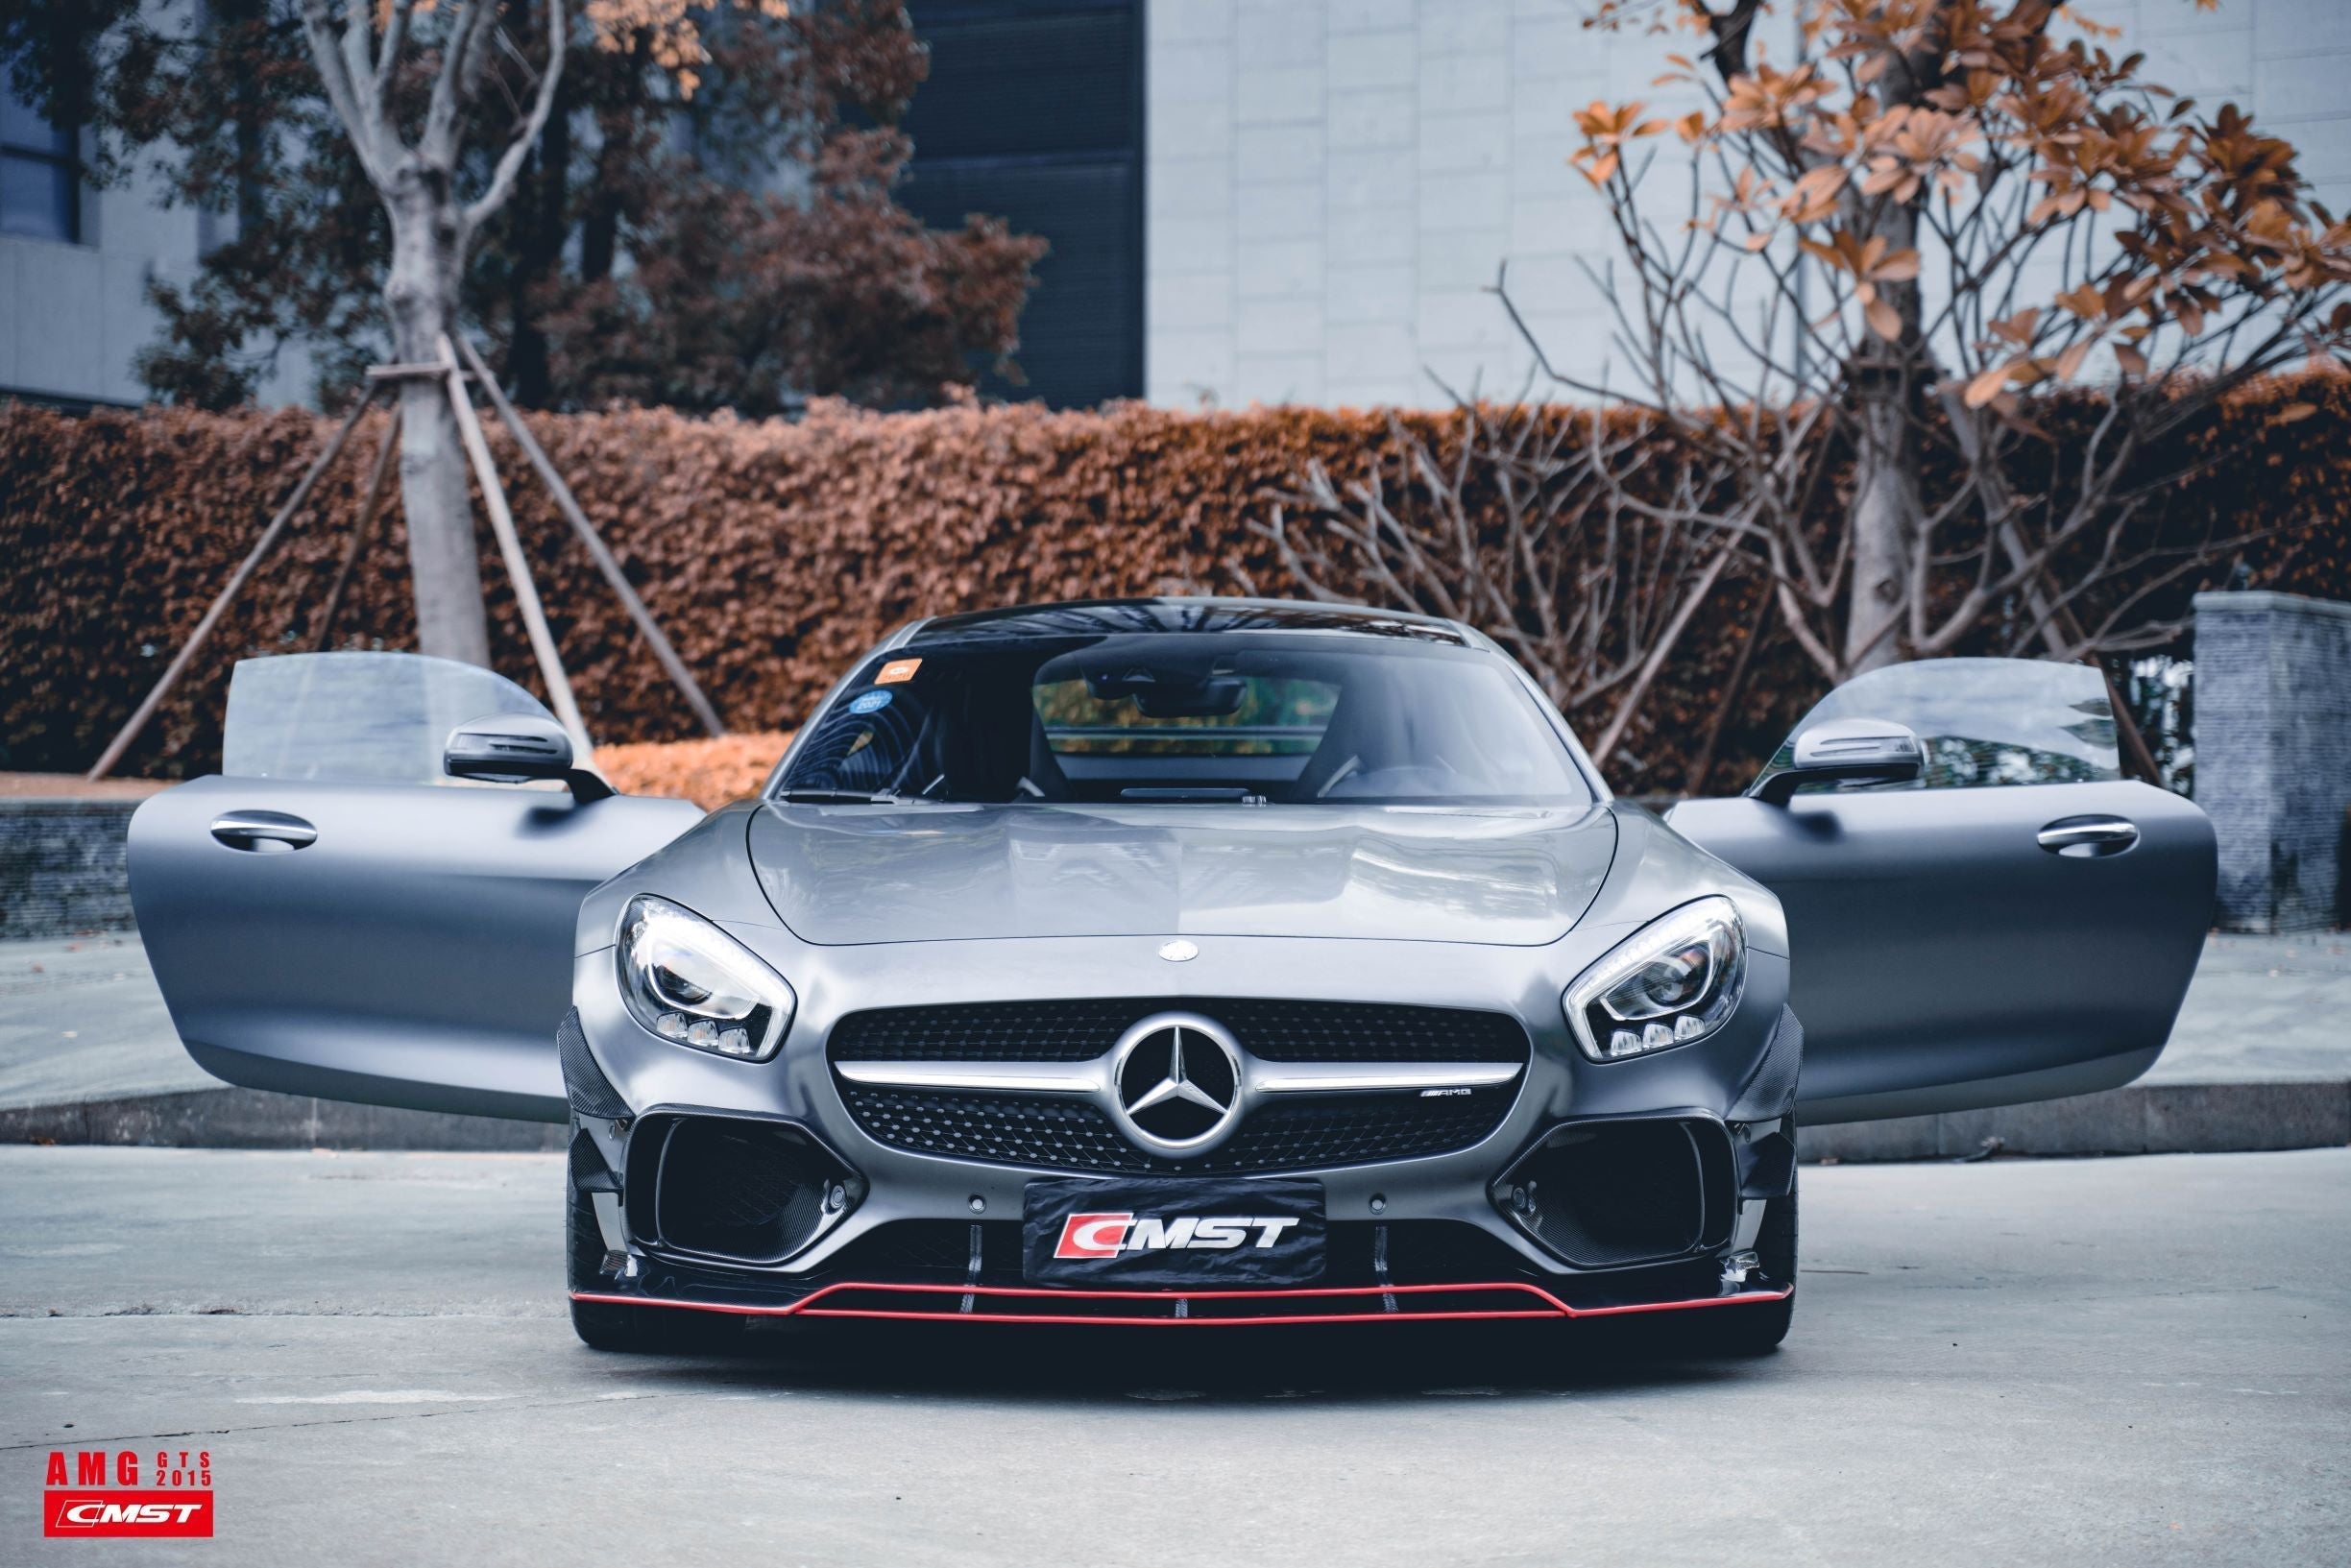 CMST Tuning Carbon Fiber Front Lip for Mercedes Benz C190 AMG GT GTS 2015-2017-11